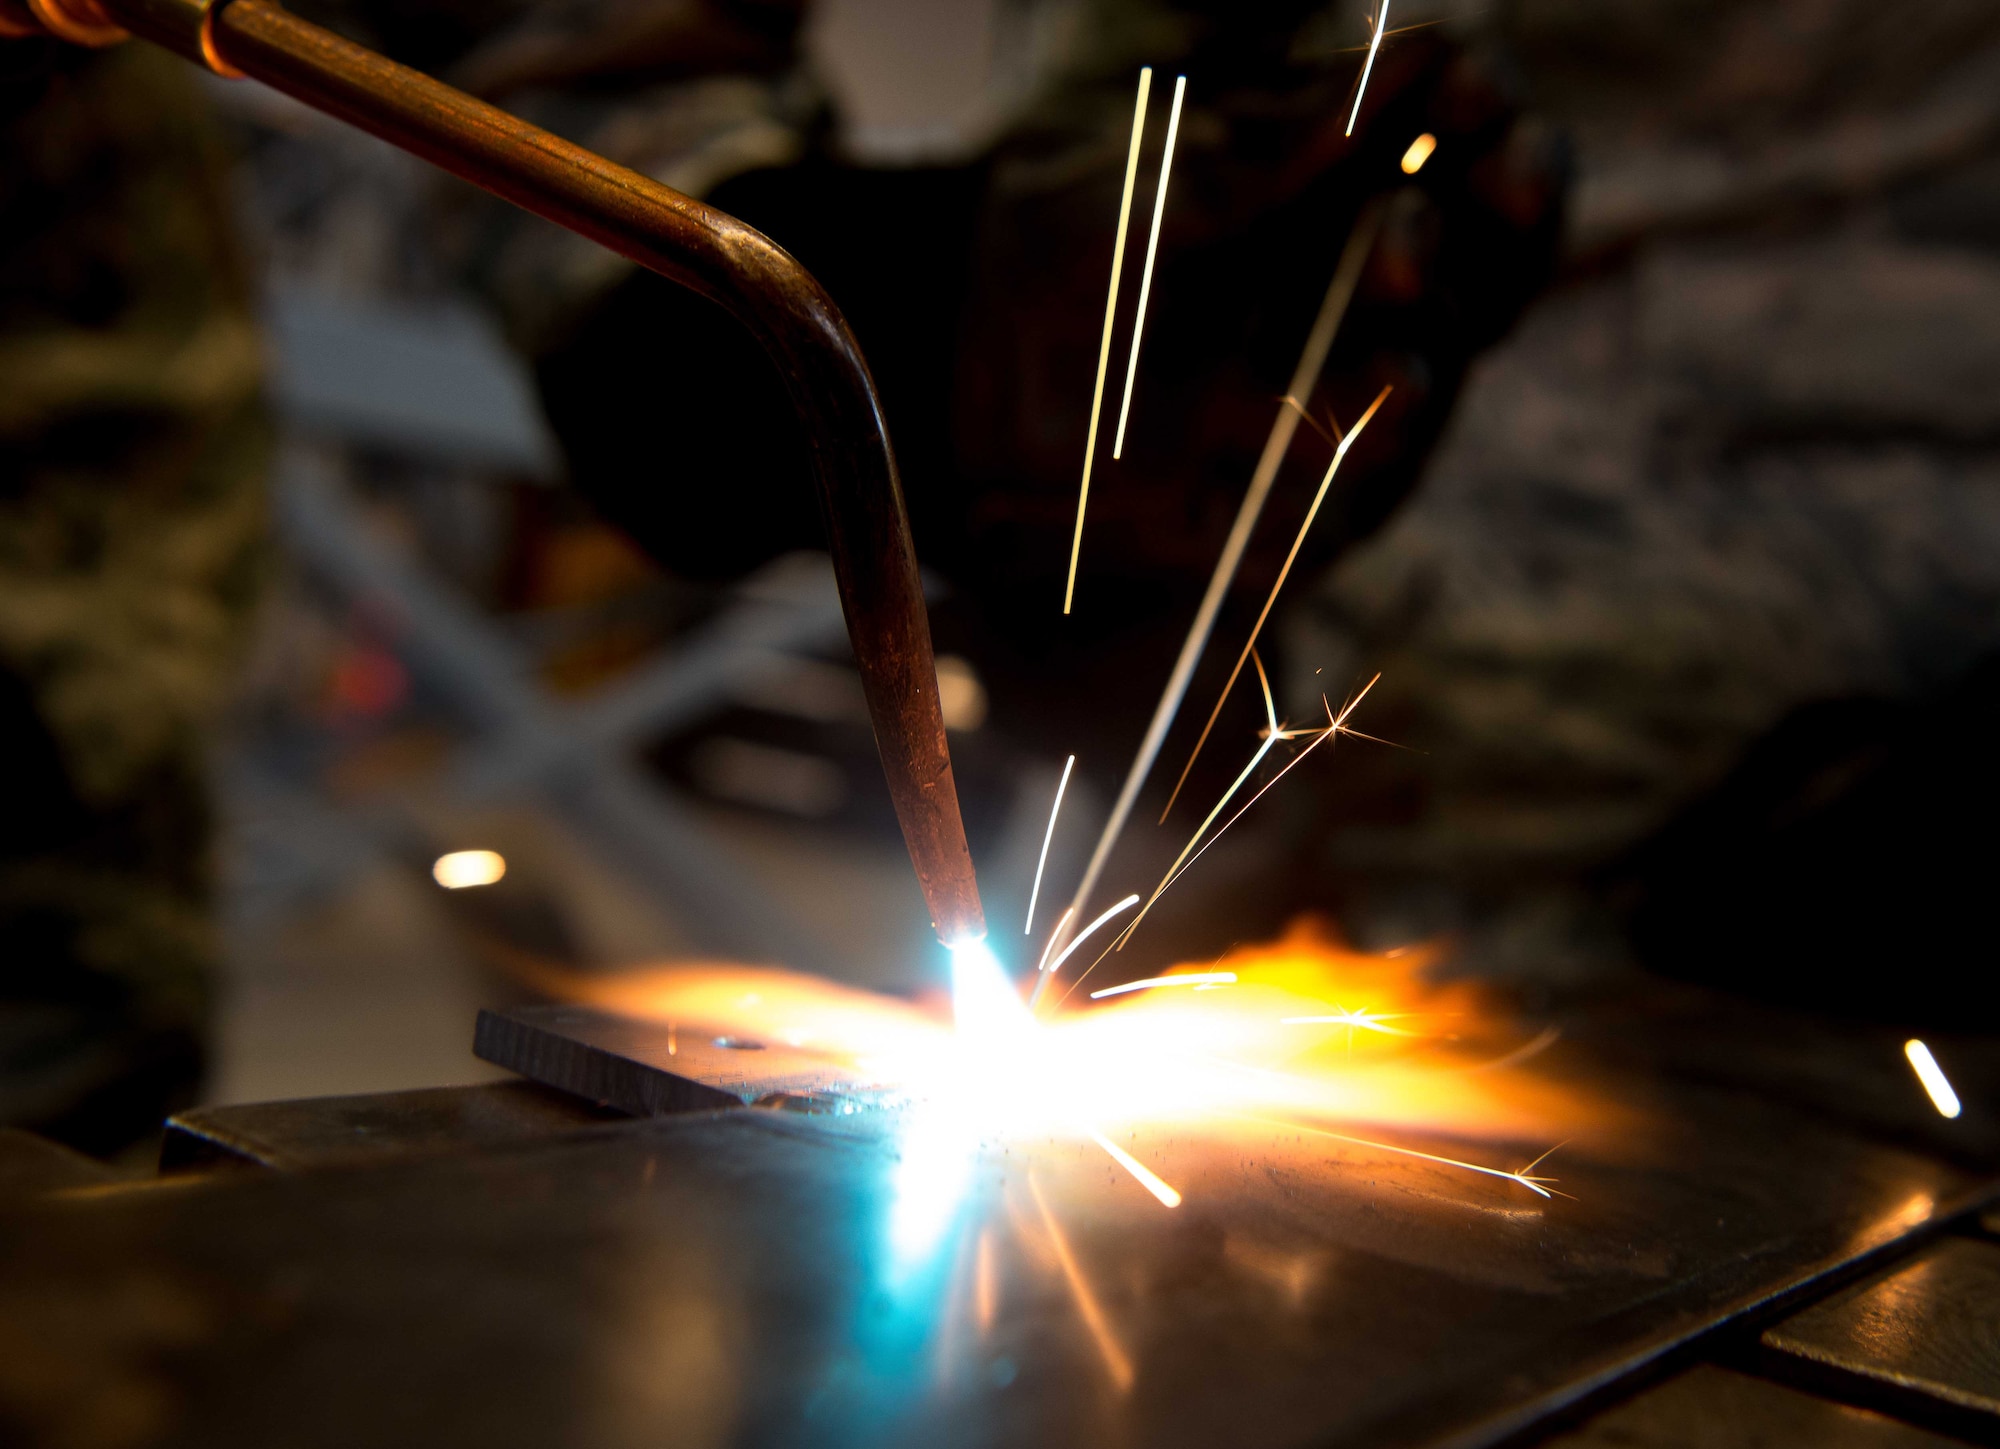 Staff Sgt. Brandon Didonato, 86th Maintenance Squadron aircraft metals technology technician, used an oxyacetylene welder on Ramstein Air Base, Germany, May 2, 2017. The 86th MXS Aircraft Metals Technology shop welds and machines tools and parts, such as bolts, brackets and exhausts, in support of the flight line. (U.S. Air Force photo by Senior Airman Elizabeth Baker/Released)